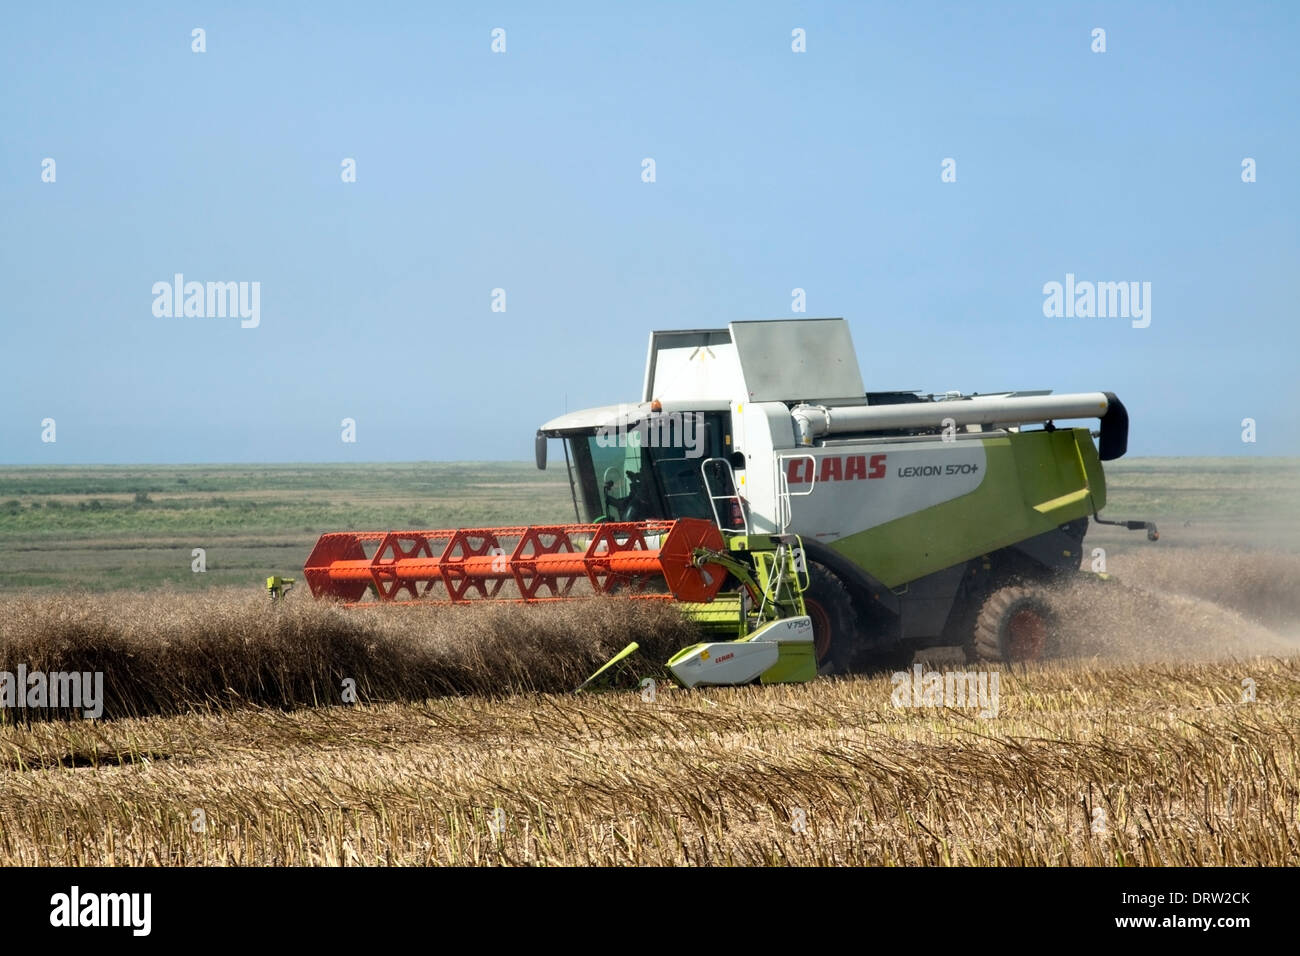 Oil seed rape harvest in North Norfolk with a Claas Lexion 570+ harvester Stock Photo